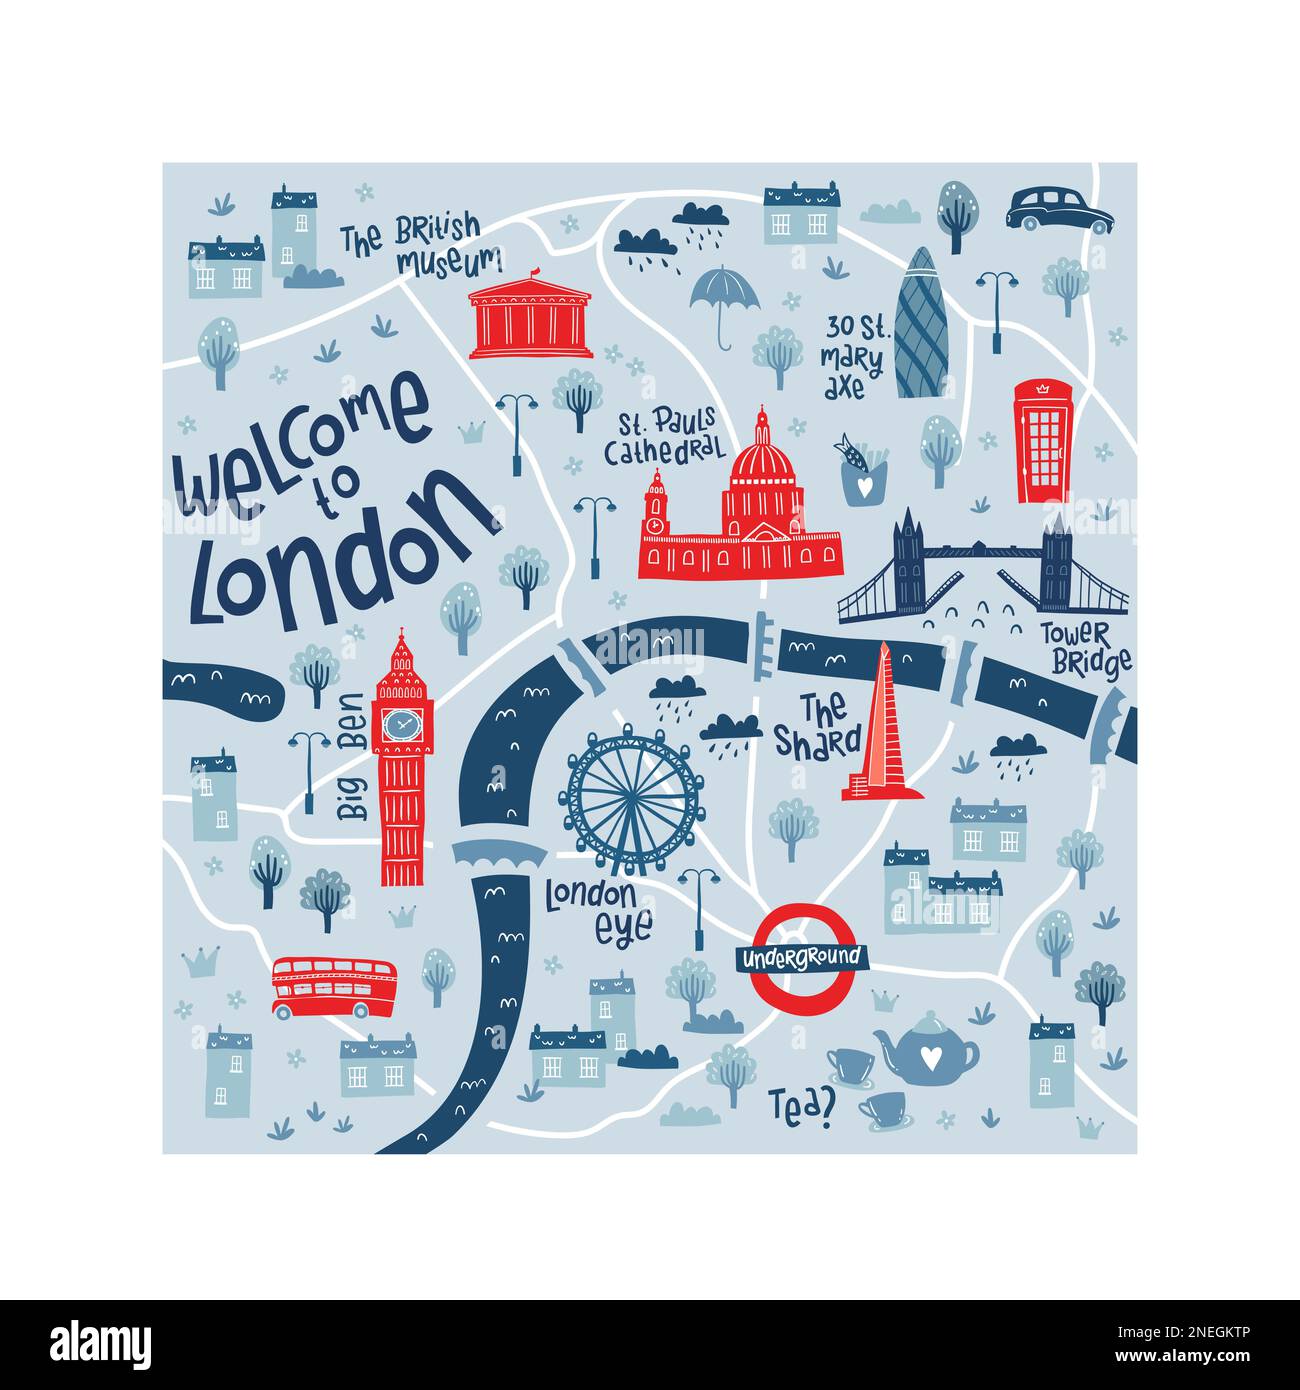 Cute hand drawn map of London with doodle elements, sights, buildings - great for postcards, prints, banners, wallpaper - vector design Stock Vector